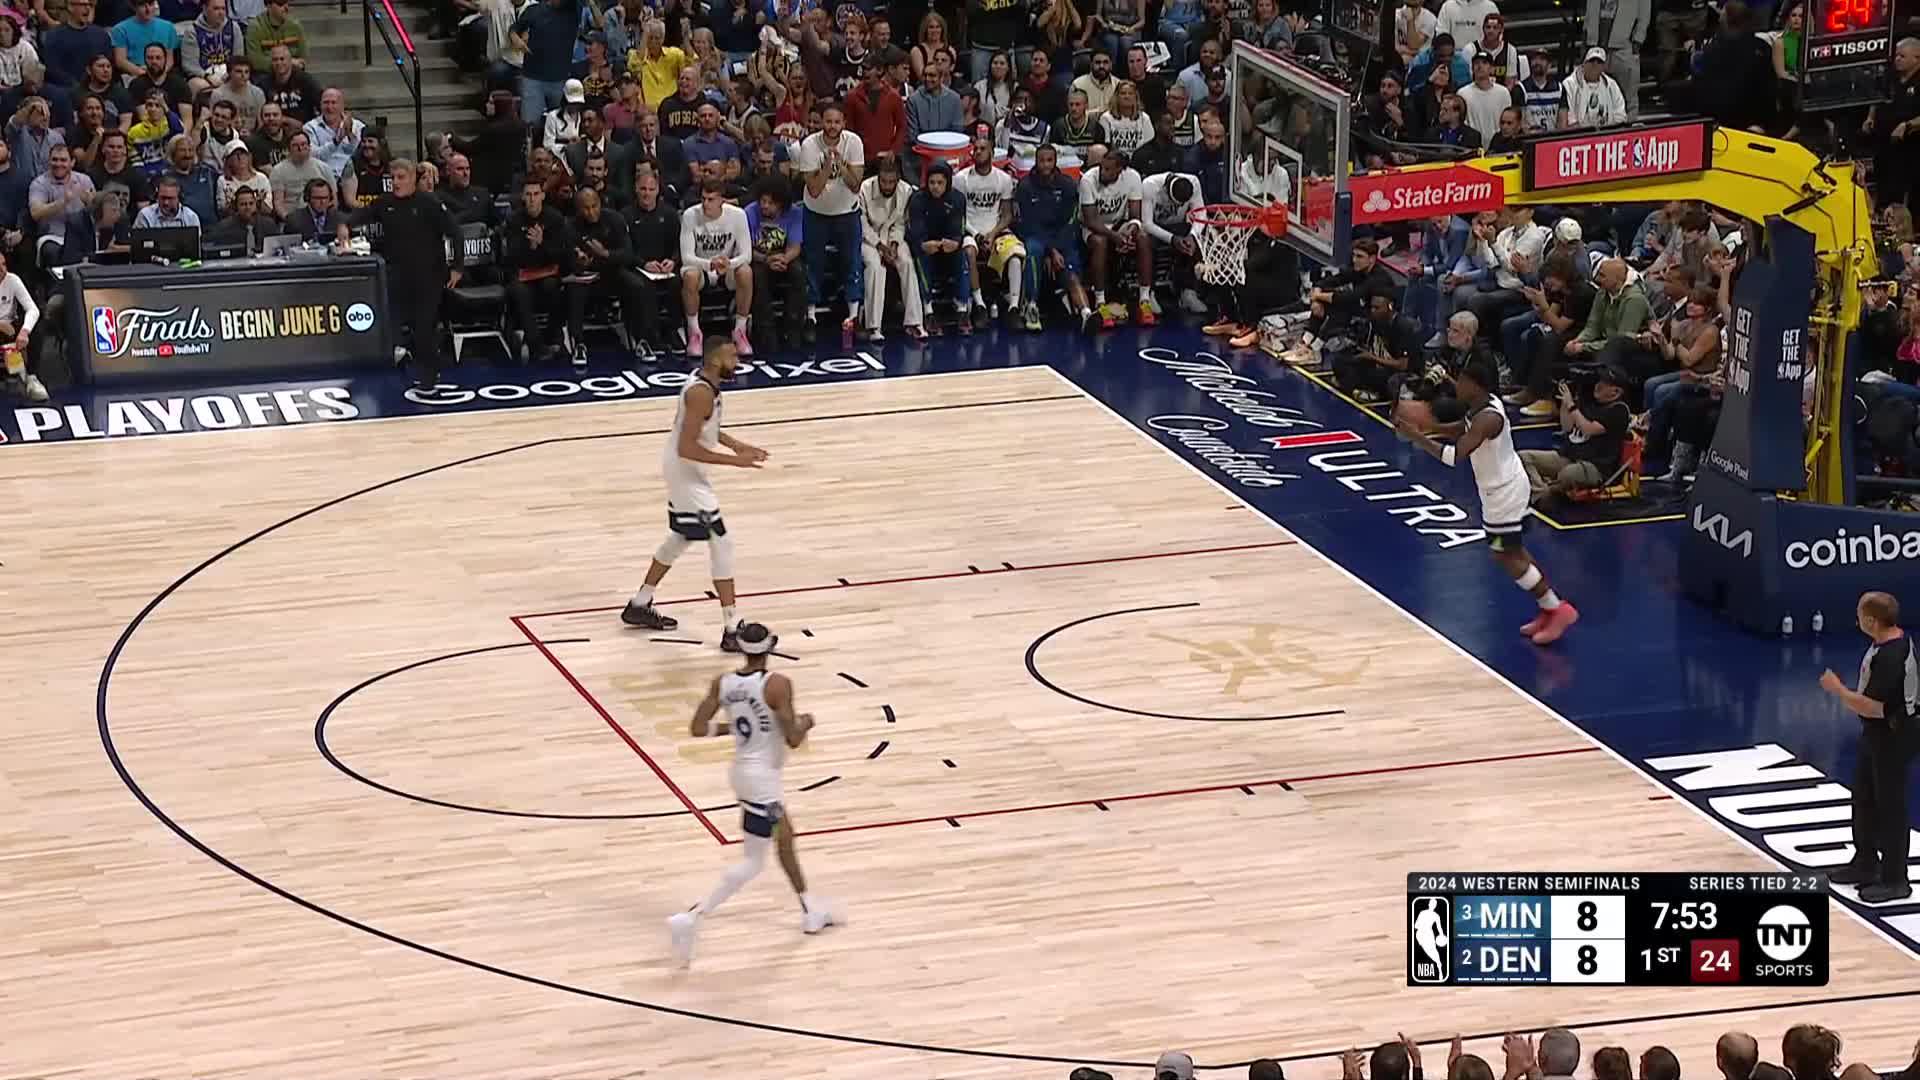 Jokic Puts the Moves on Rudy 🕺